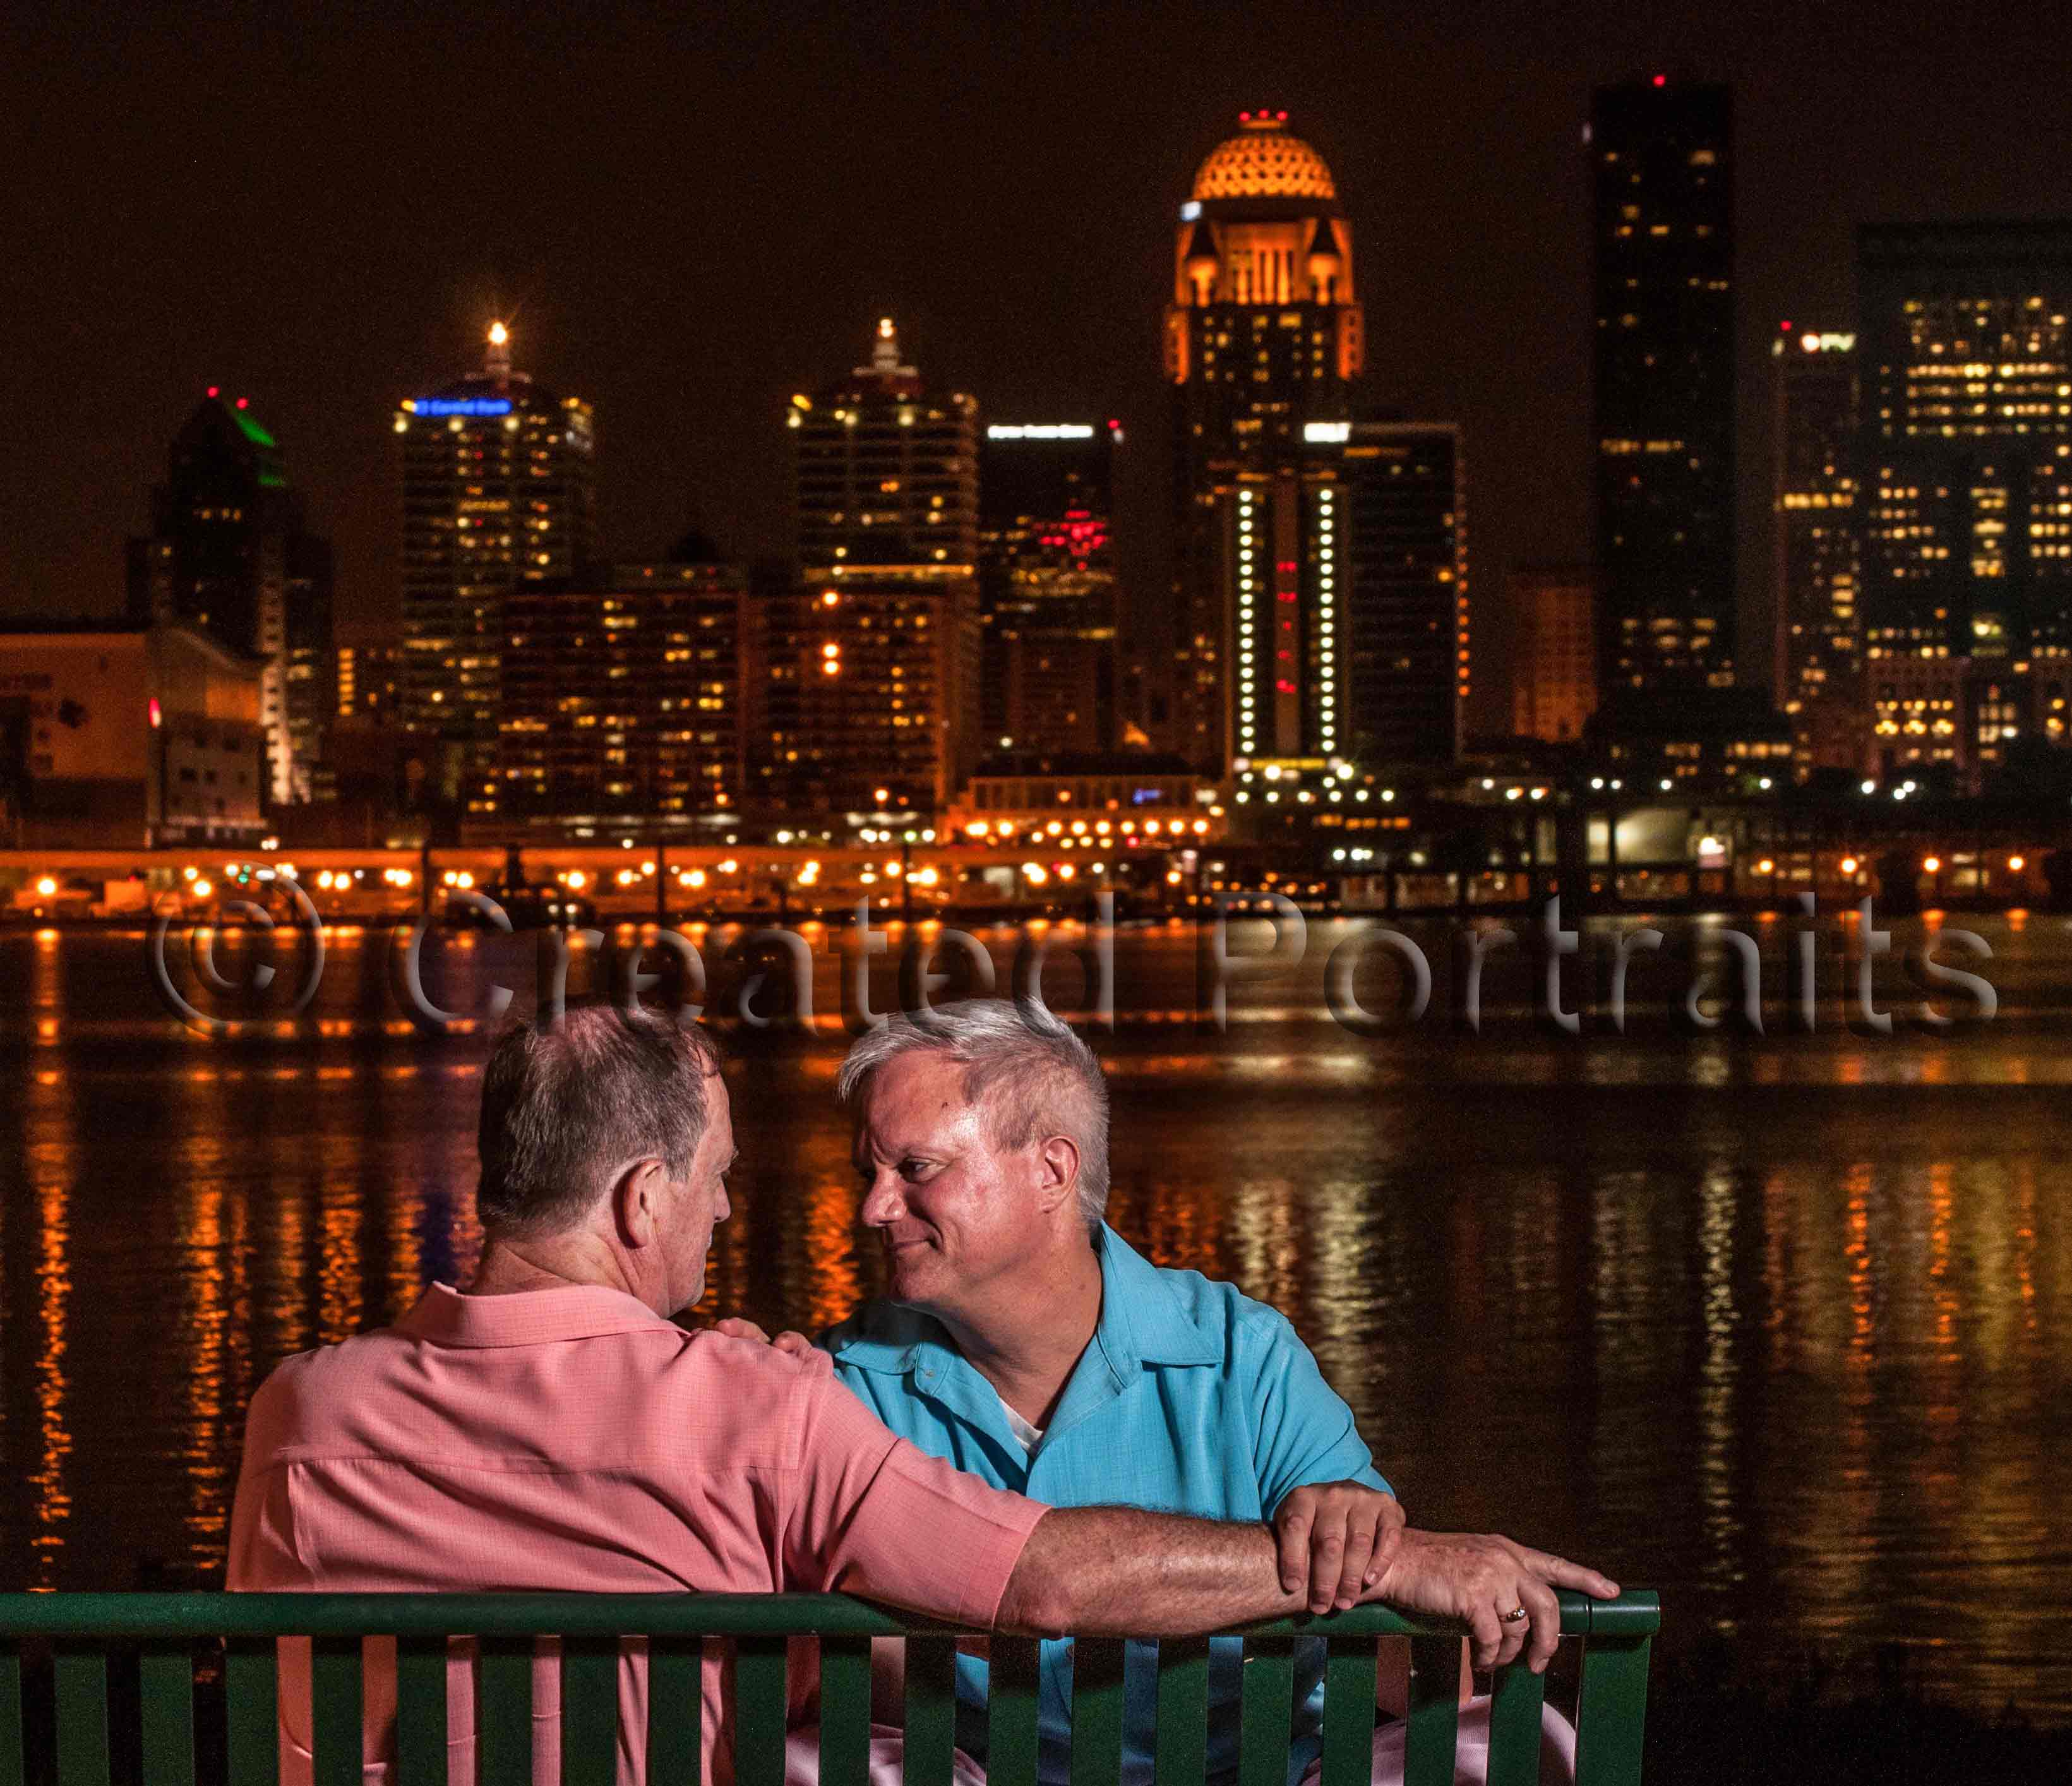 gay couple sitting on a park bench at night with Ohio river and city in the background.